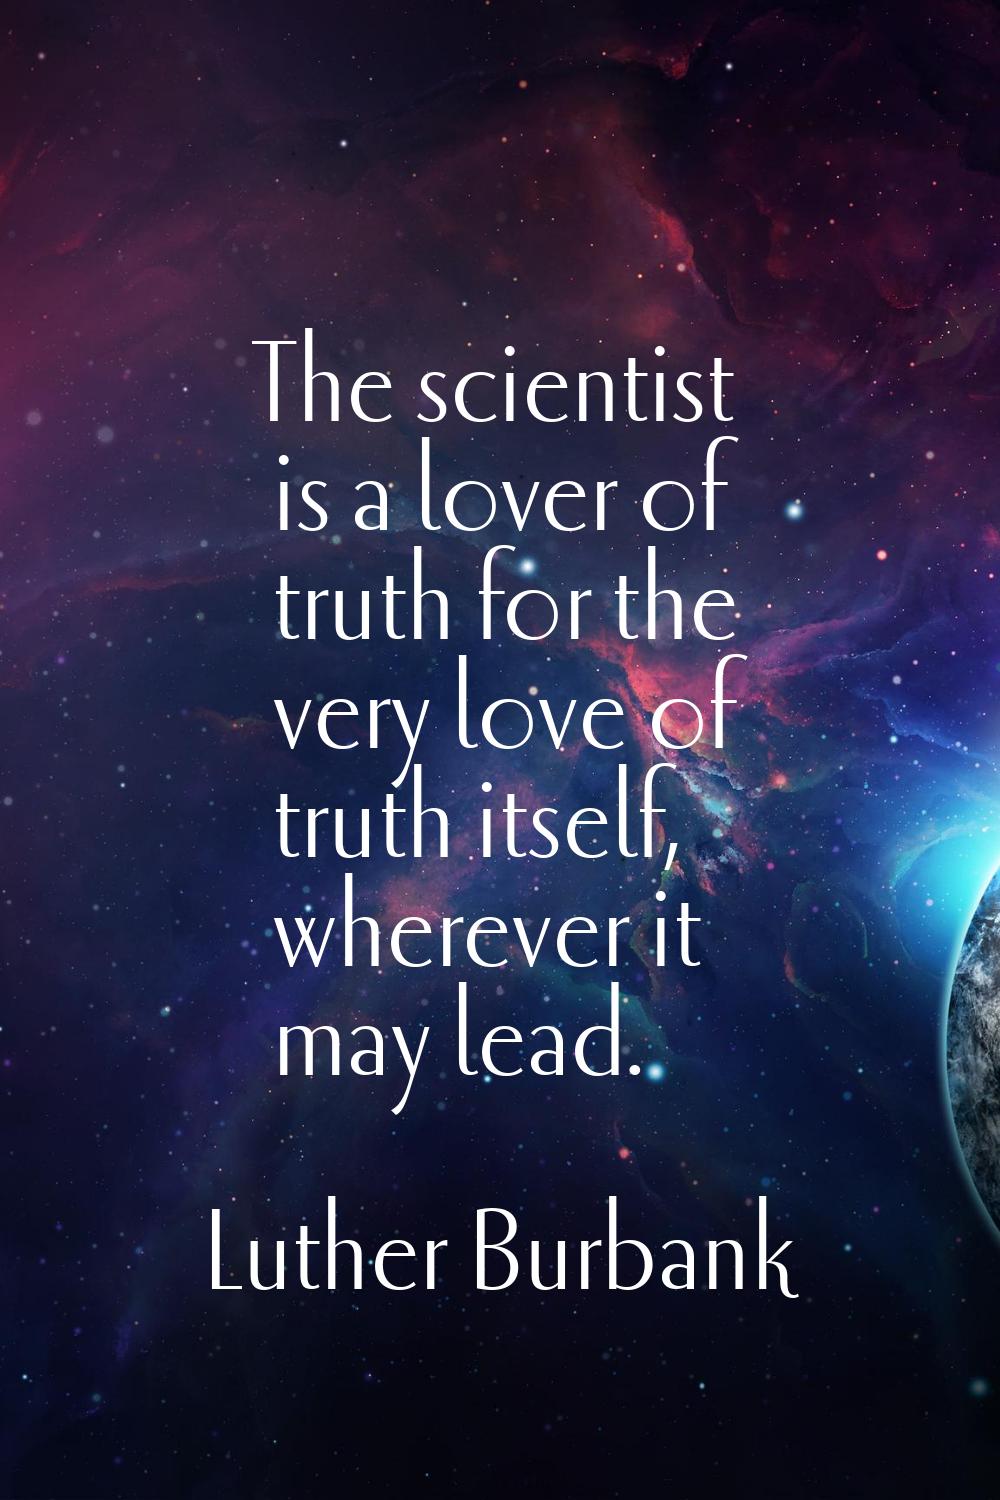 The scientist is a lover of truth for the very love of truth itself, wherever it may lead.